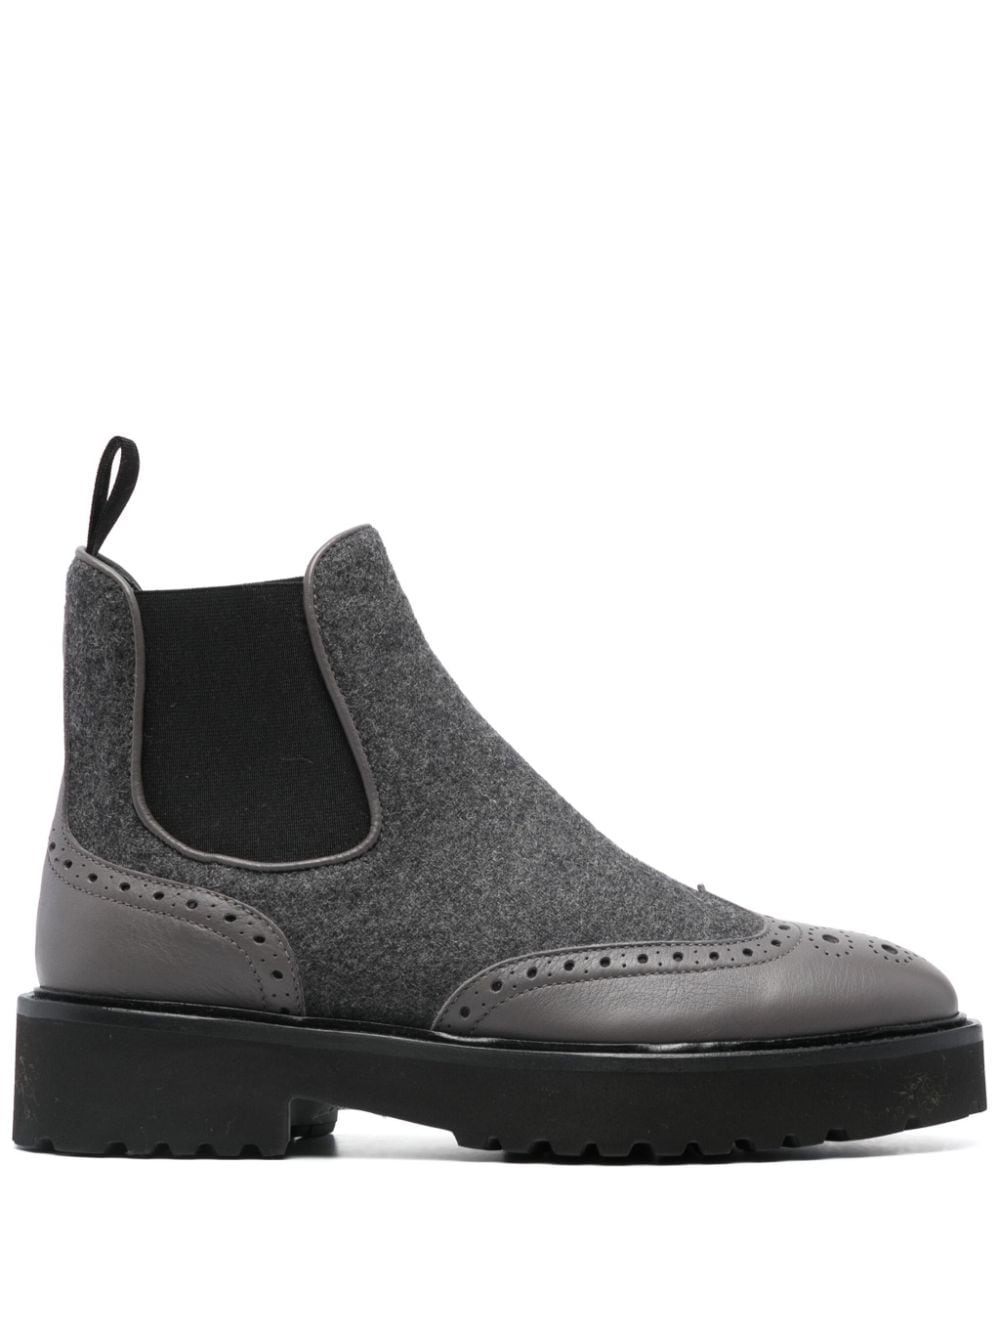 Doucal's felted ankle boots - Grey von Doucal's